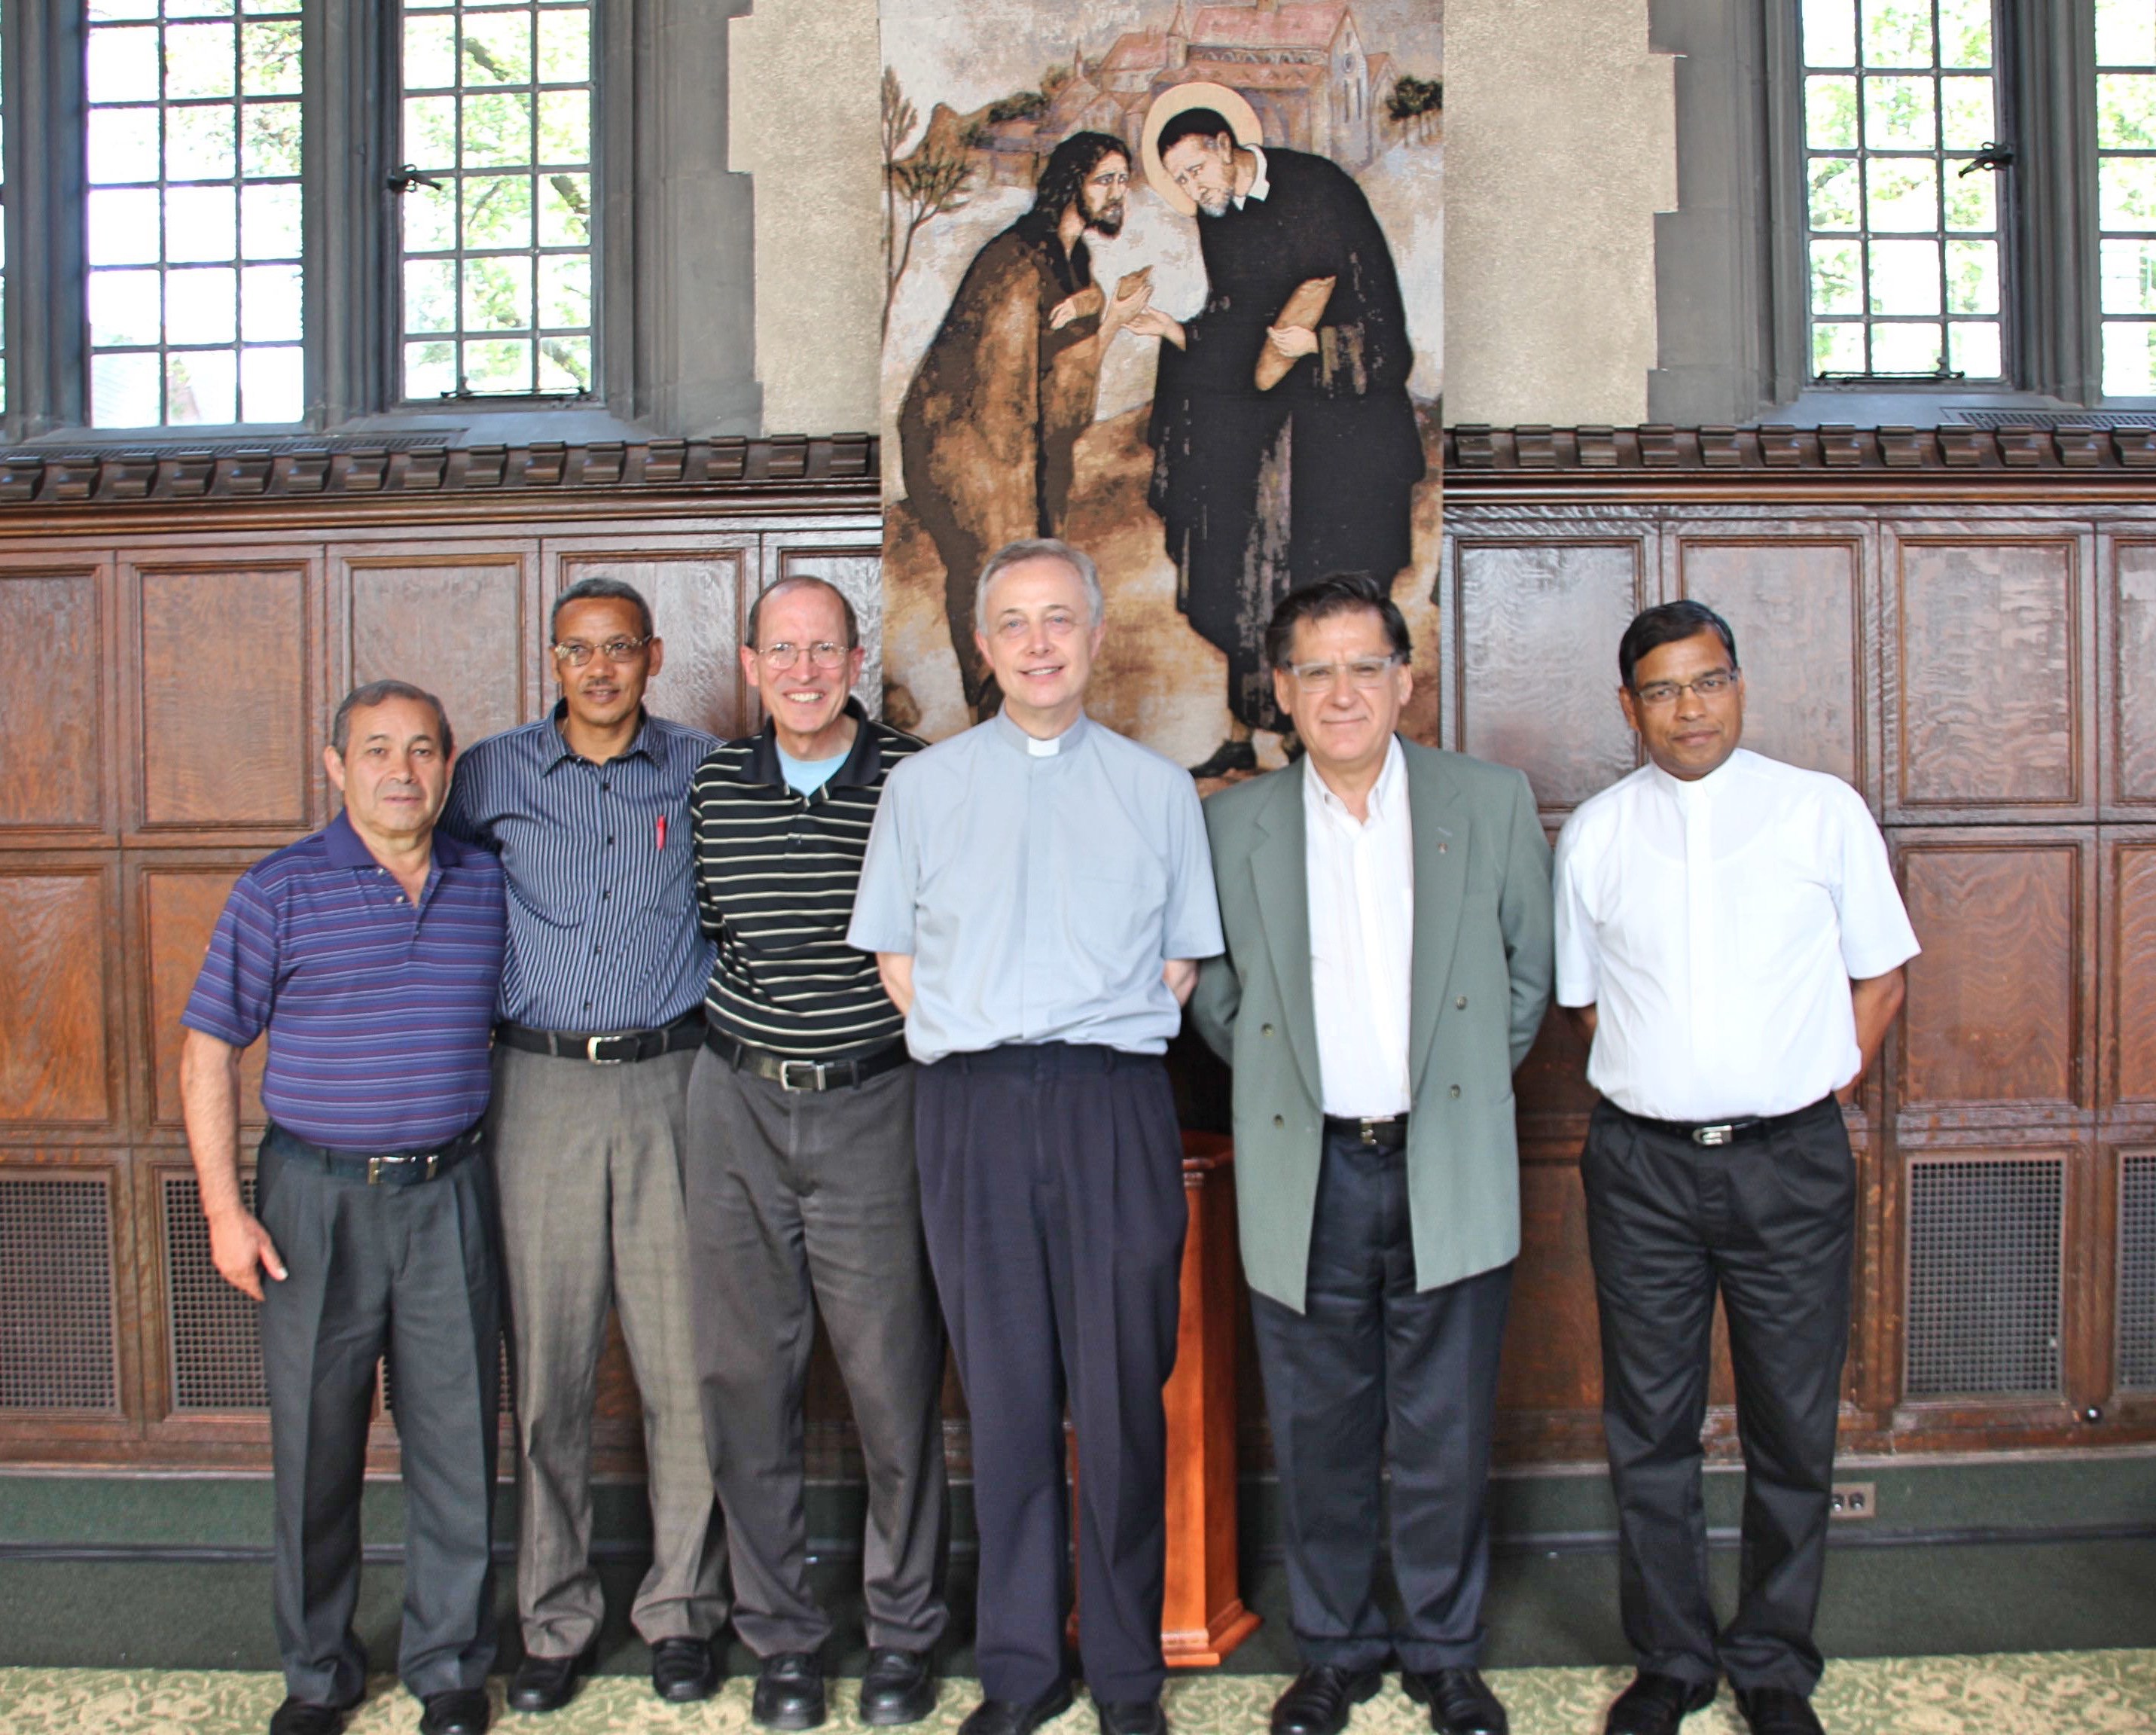 The newly elected General Council of the Congregation of the Mission